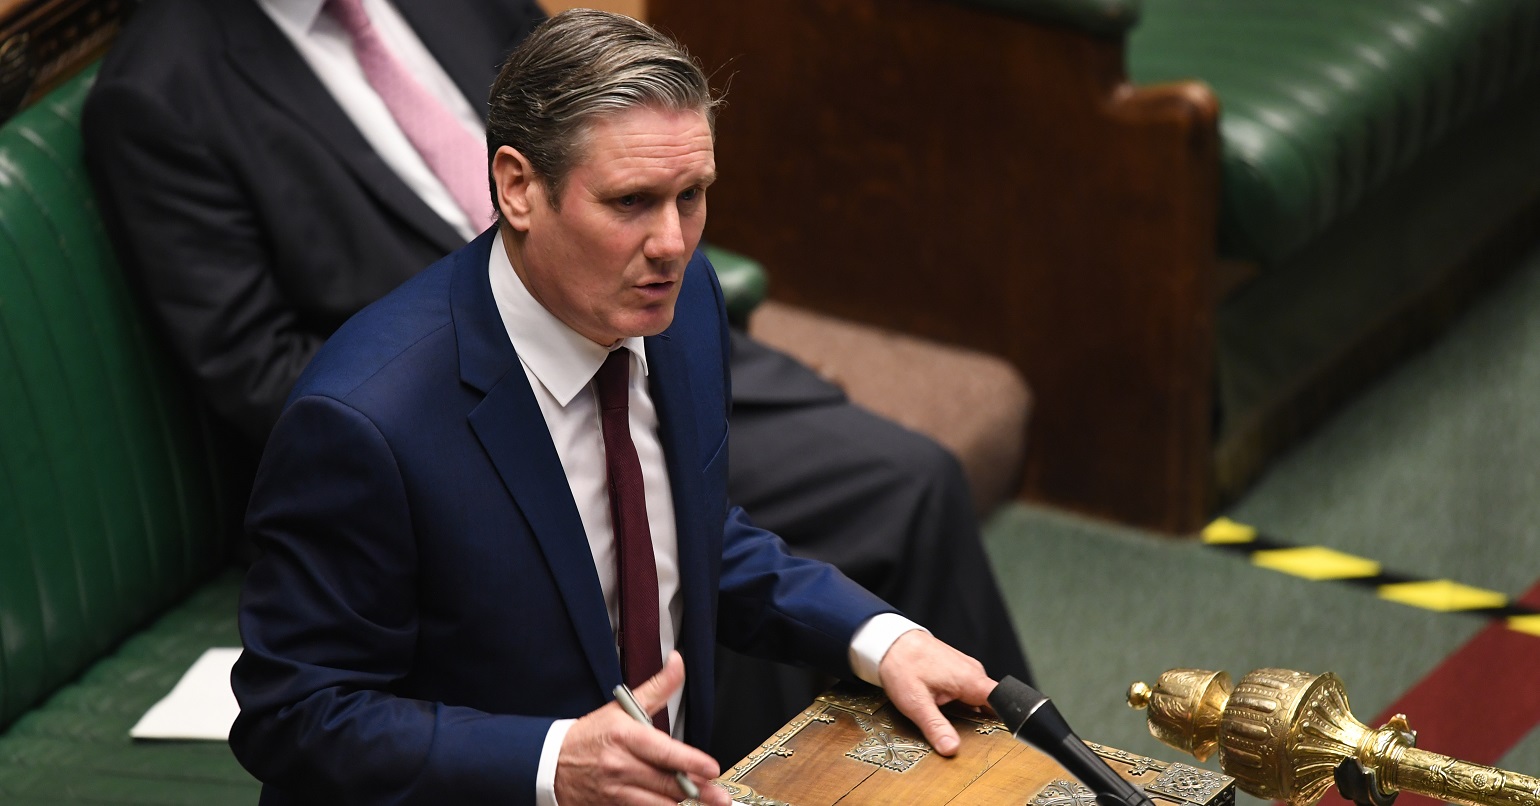 Labour leader Keir Starmer speaking at the House of Commons despatch box